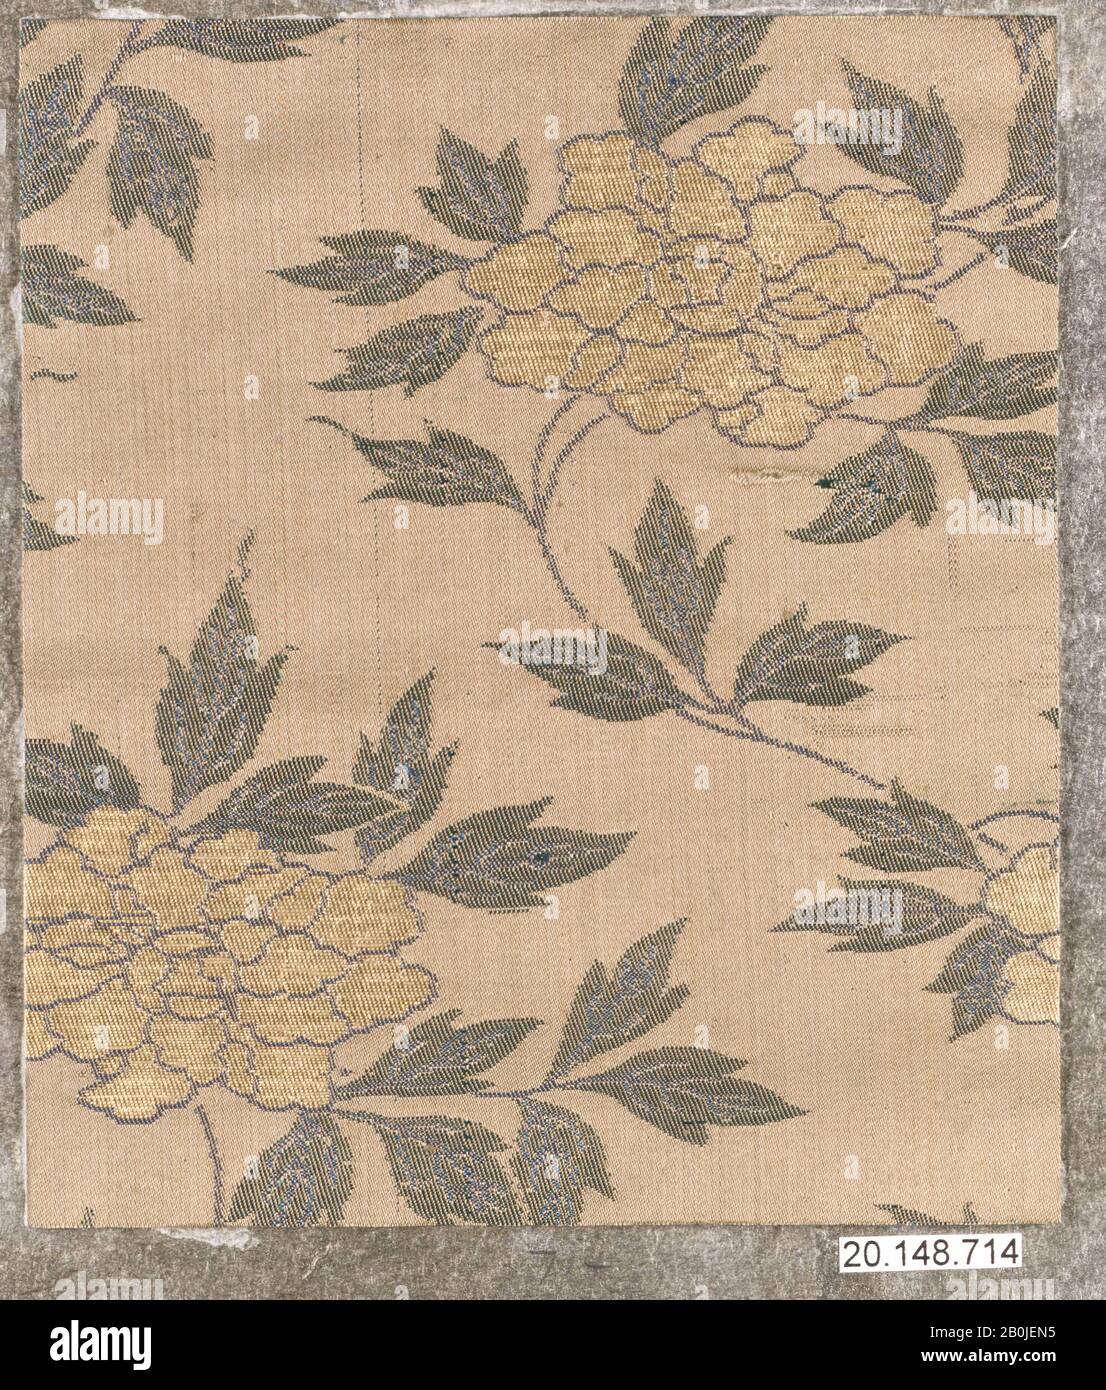 Piece, Japan, 19th century, Japan, Silk, Compound weave, 5 1/4 × 4 1/2 in. (13.3 × 11.4 cm), Textiles-Woven Stock Photo